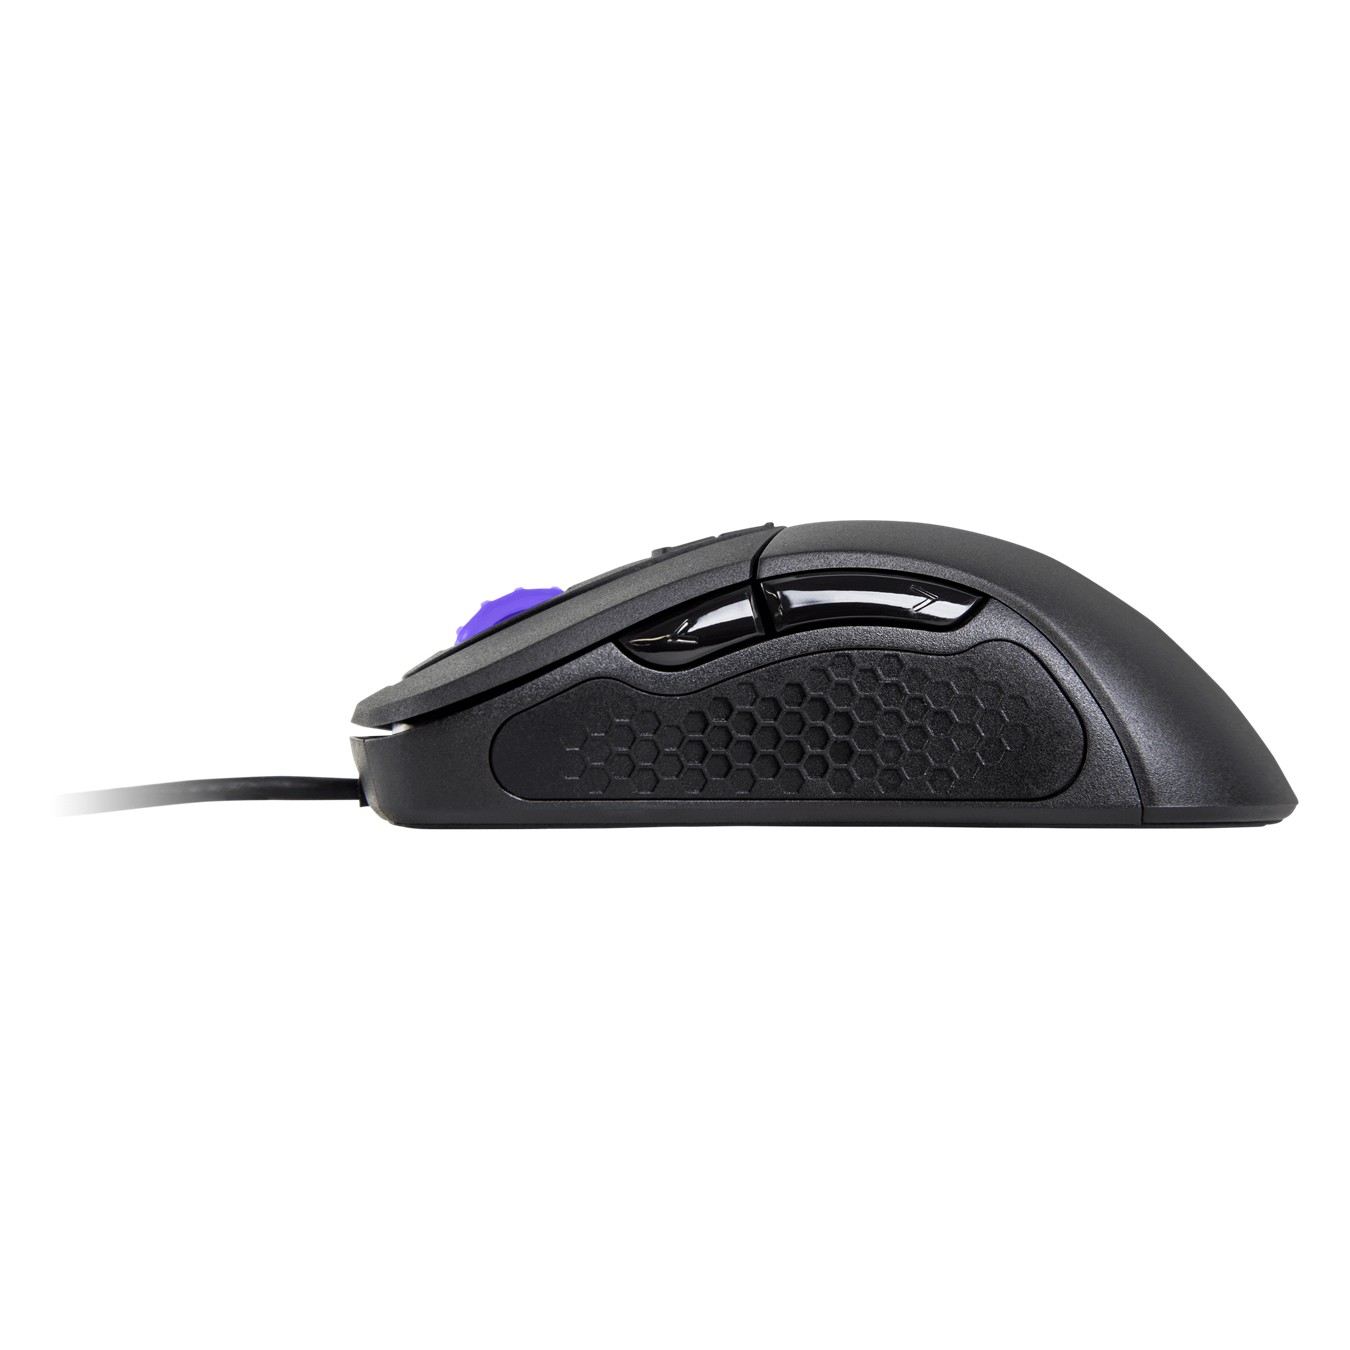 MasterMouse MM530 Gaming Mouse - Fully Programmable with user friendly software interface to customize lighting, buttons assignments, macro’s and more.